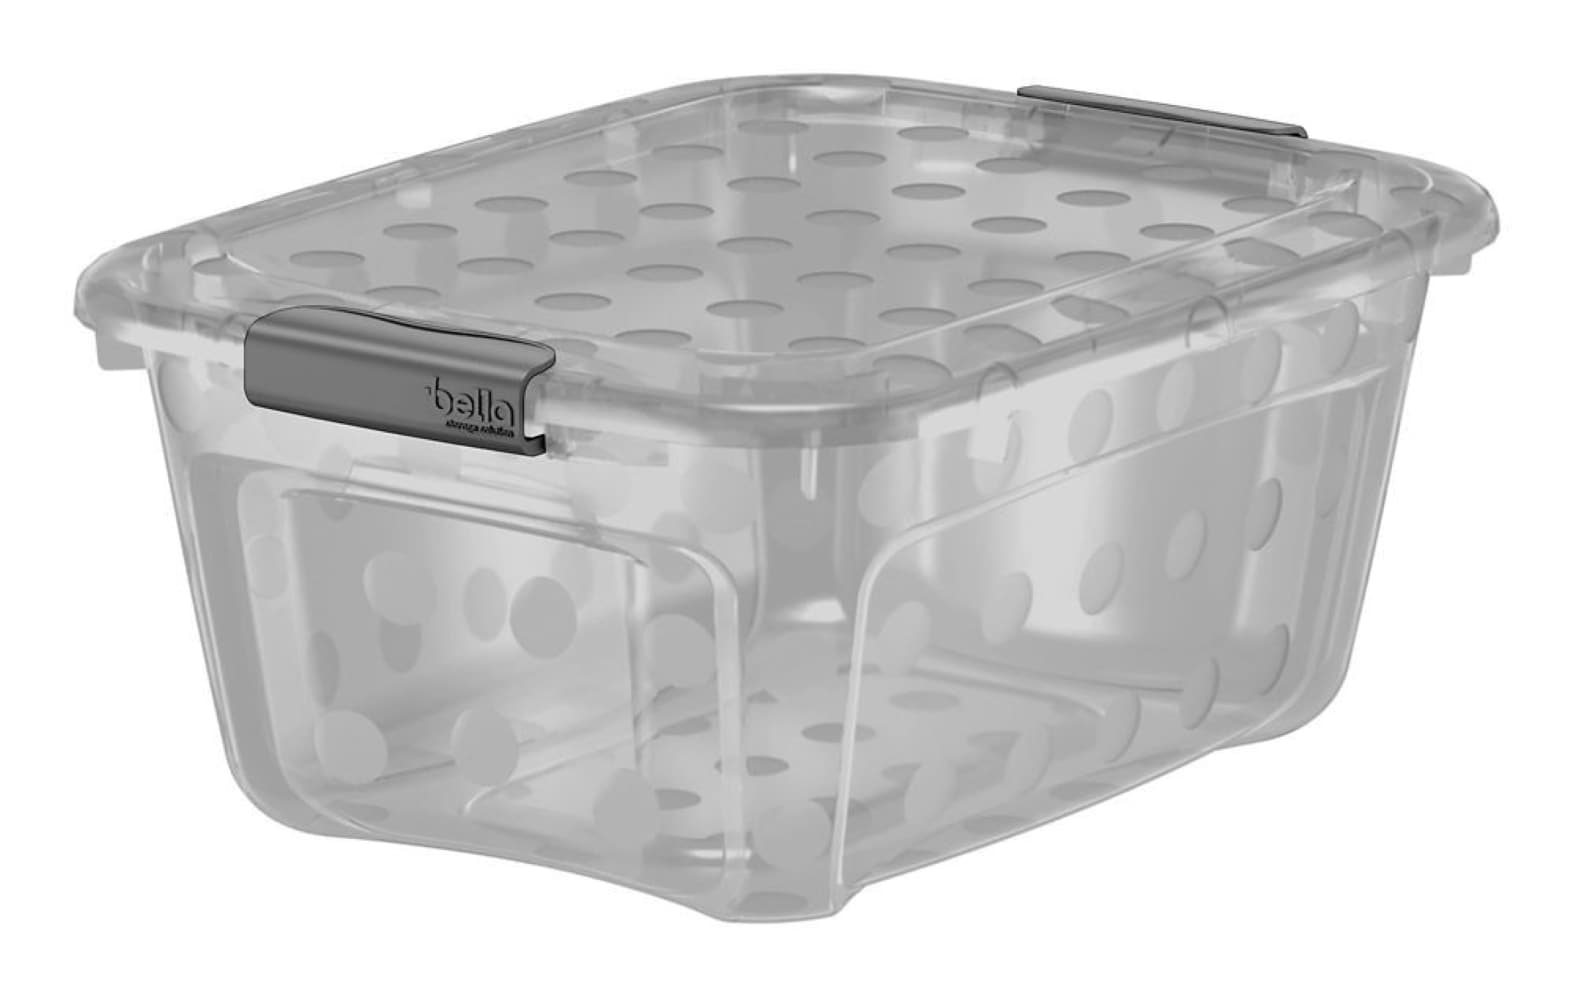 Bella Storage Solution NO break Medium 10.5-Gallons (42-Quart) Clear Tote  with Latching Lid in the Plastic Storage Containers department at